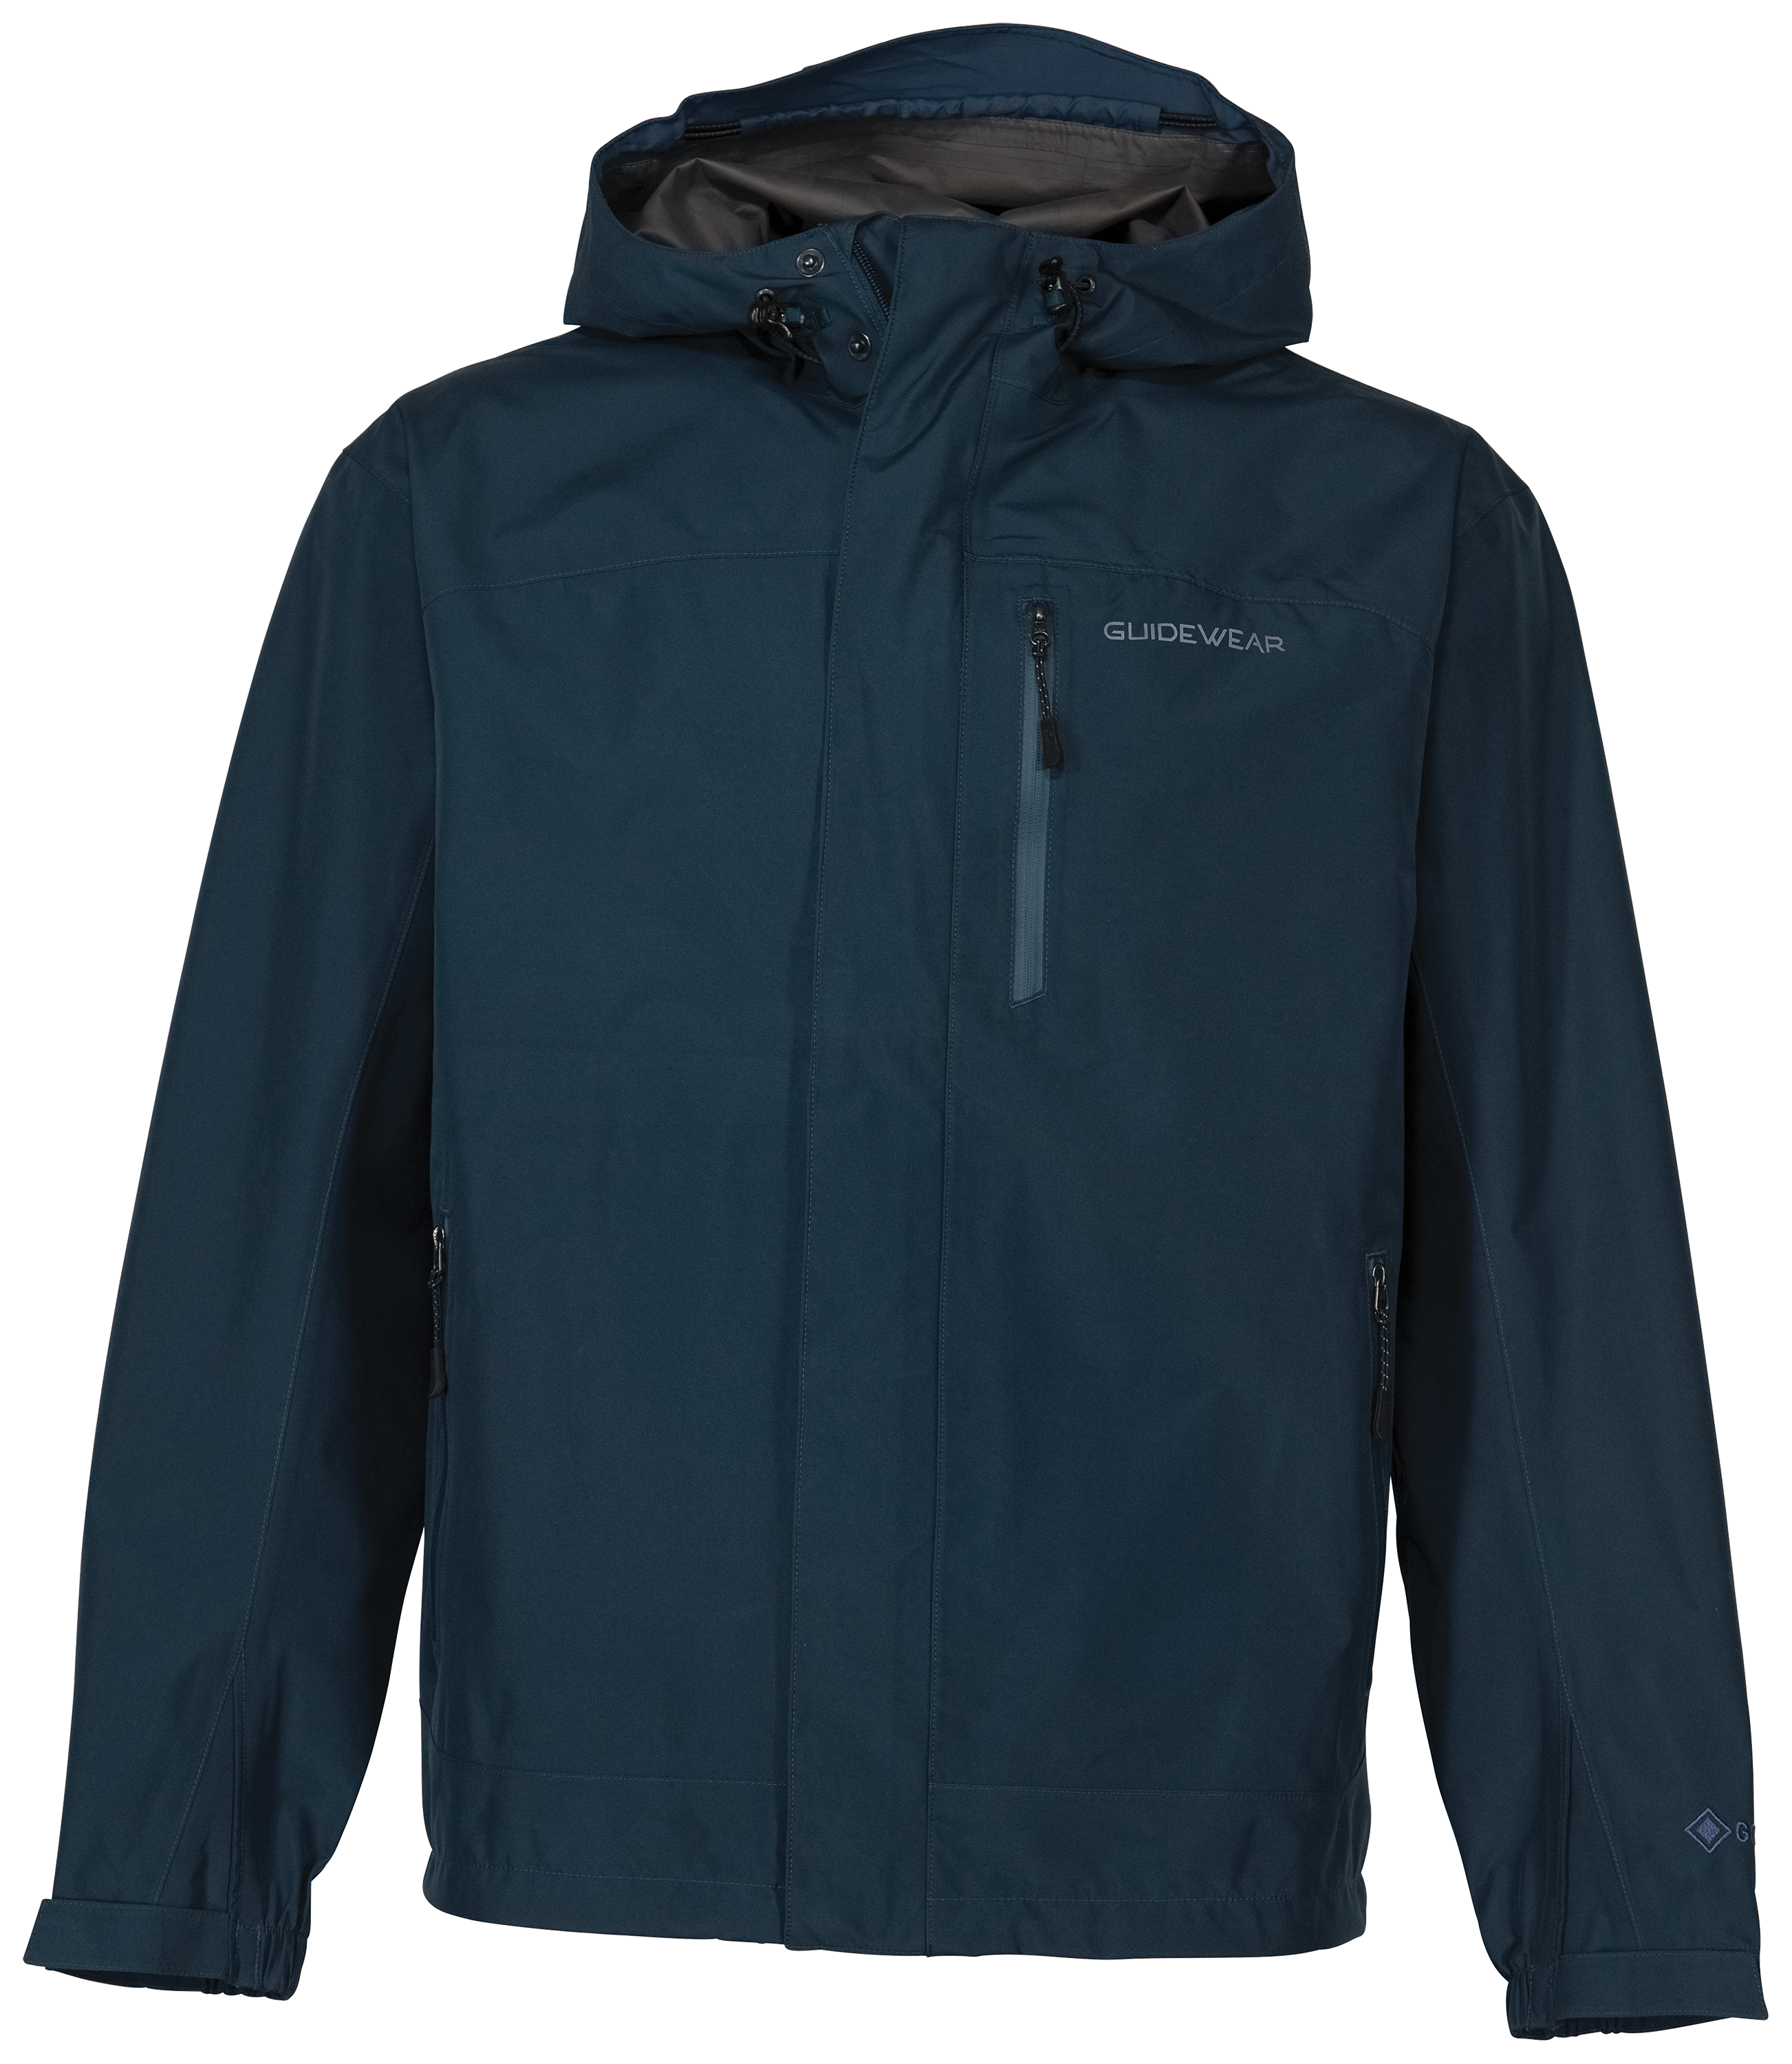 Johnny Morris Bass Pro Shops Guidewear Rainy River Jacket with GORE-TEX PacLite for Men - Shadow Blue - 3XL